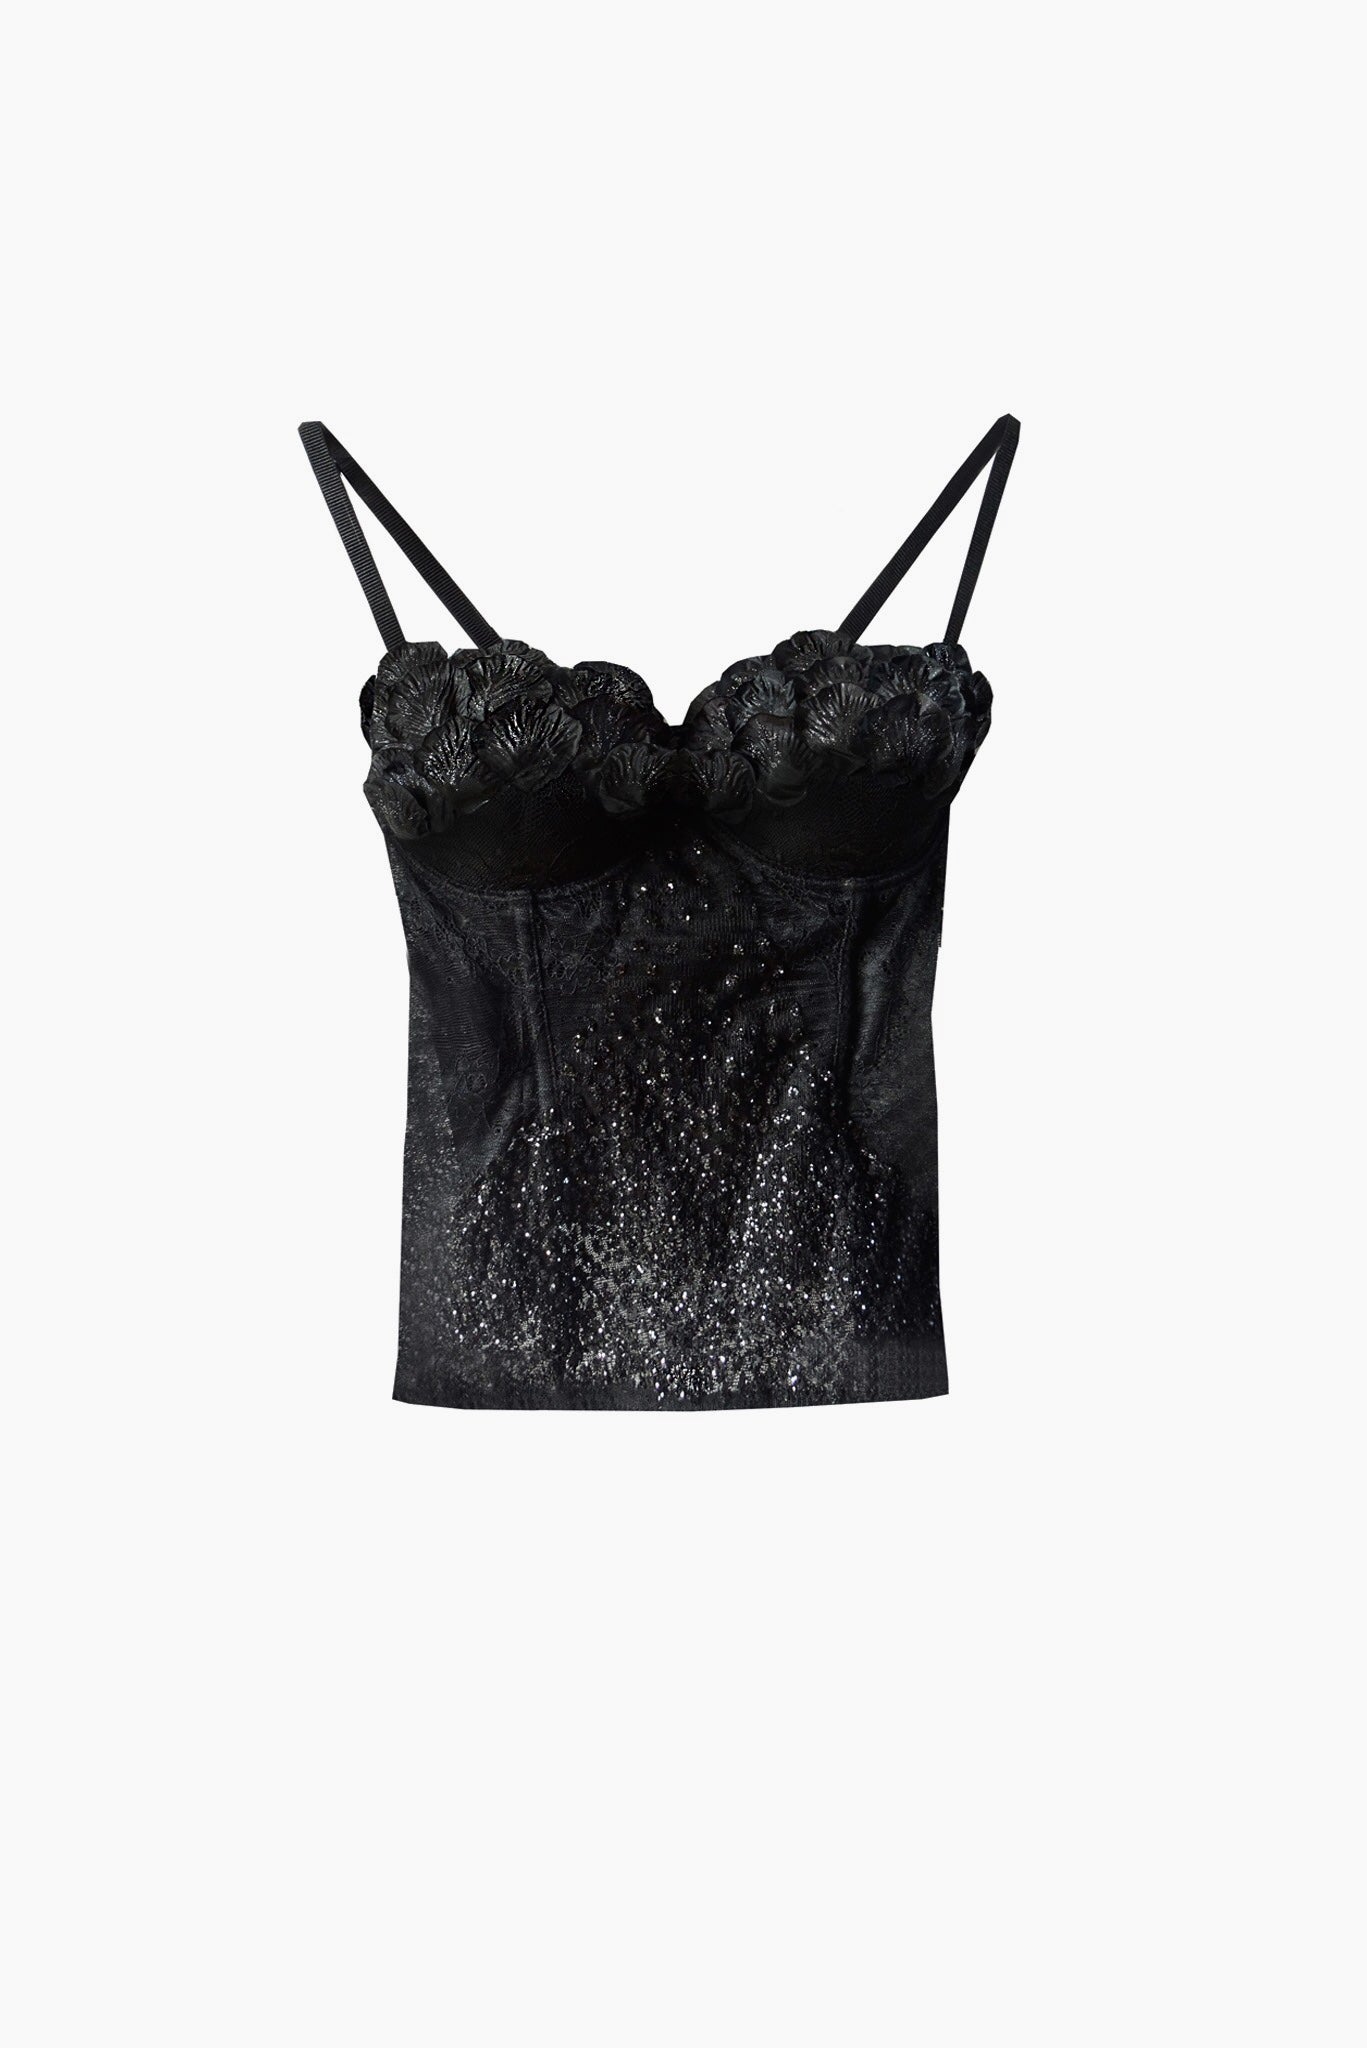 Black shimmery lace corset